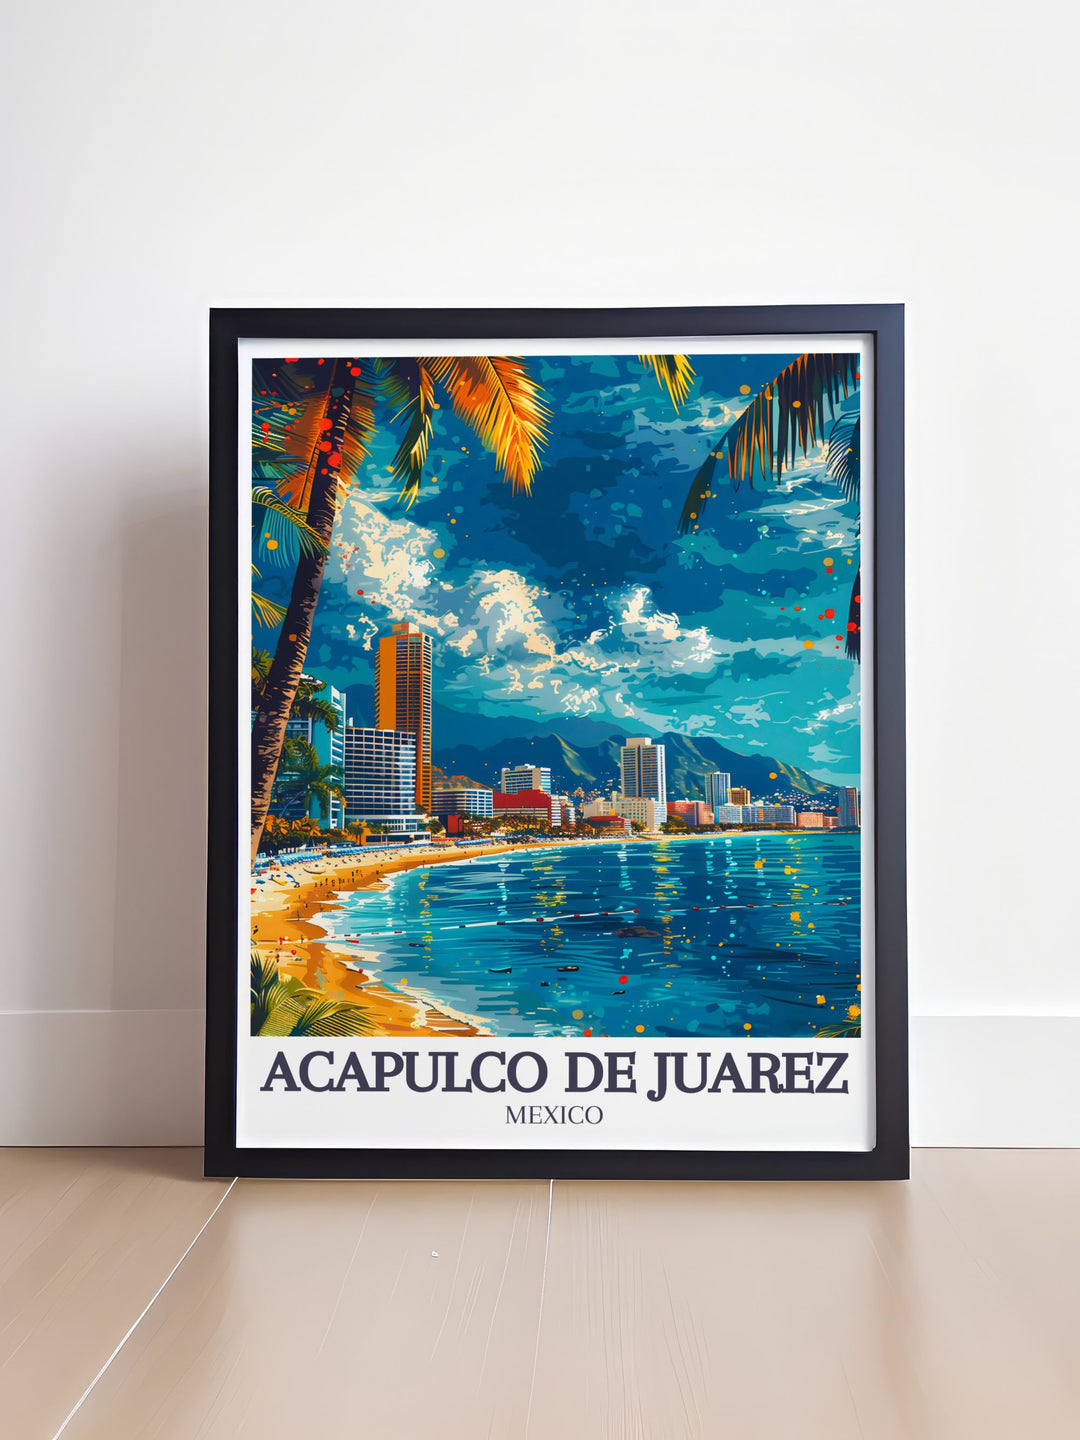 Acapulco Bays serene waters and stunning sunsets are beautifully illustrated in this travel poster, inviting viewers to explore Acapulco de Juárez.